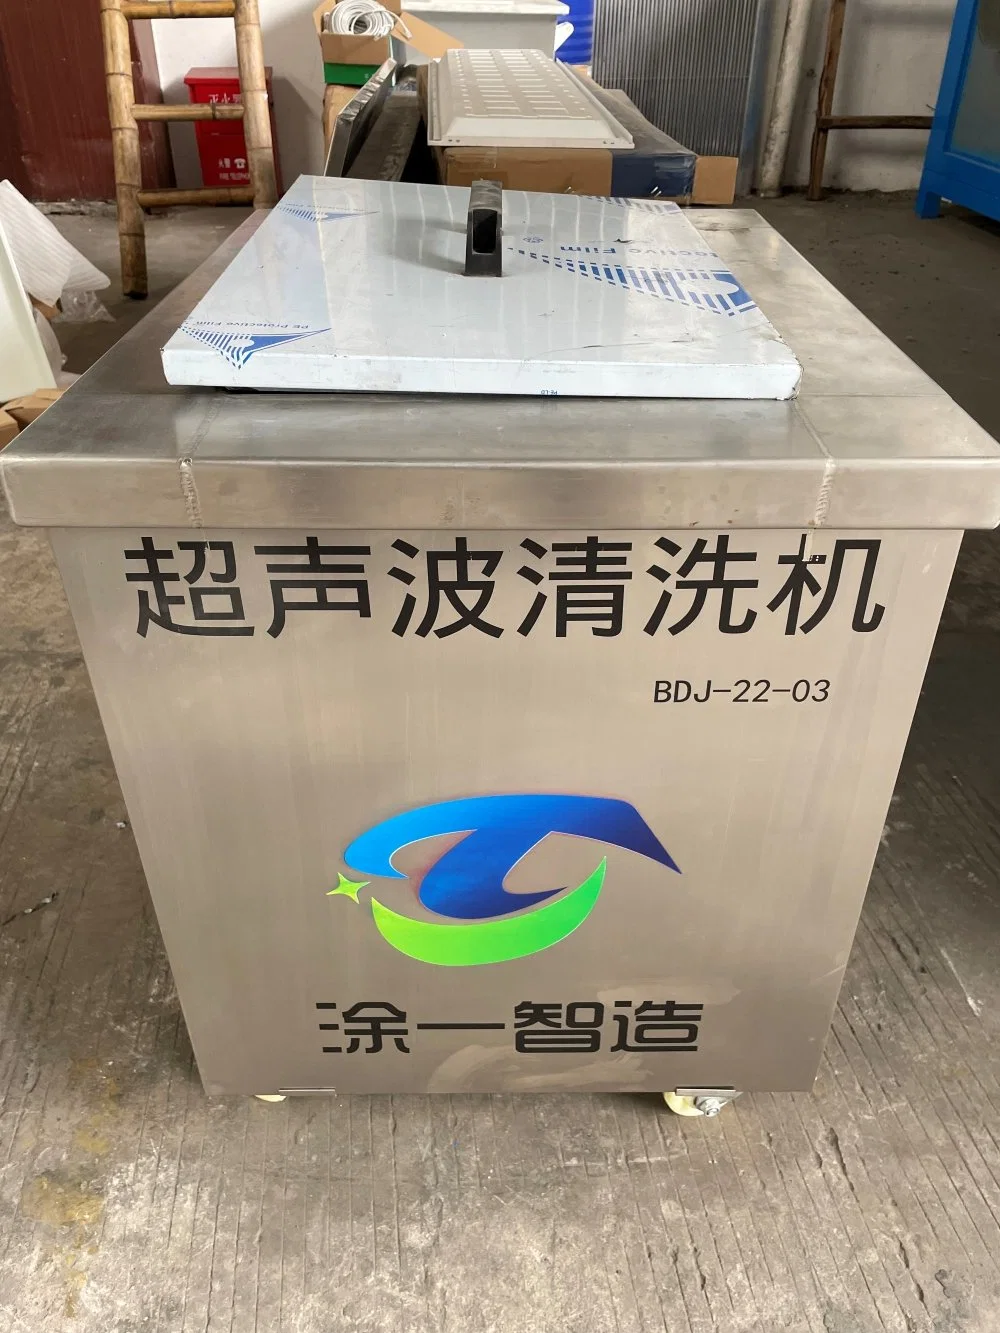 Automatic Industrial Ultrasonic Cleaning Machine Cleaner Equipment for Metal/Hardware/CNC Machinery Parts